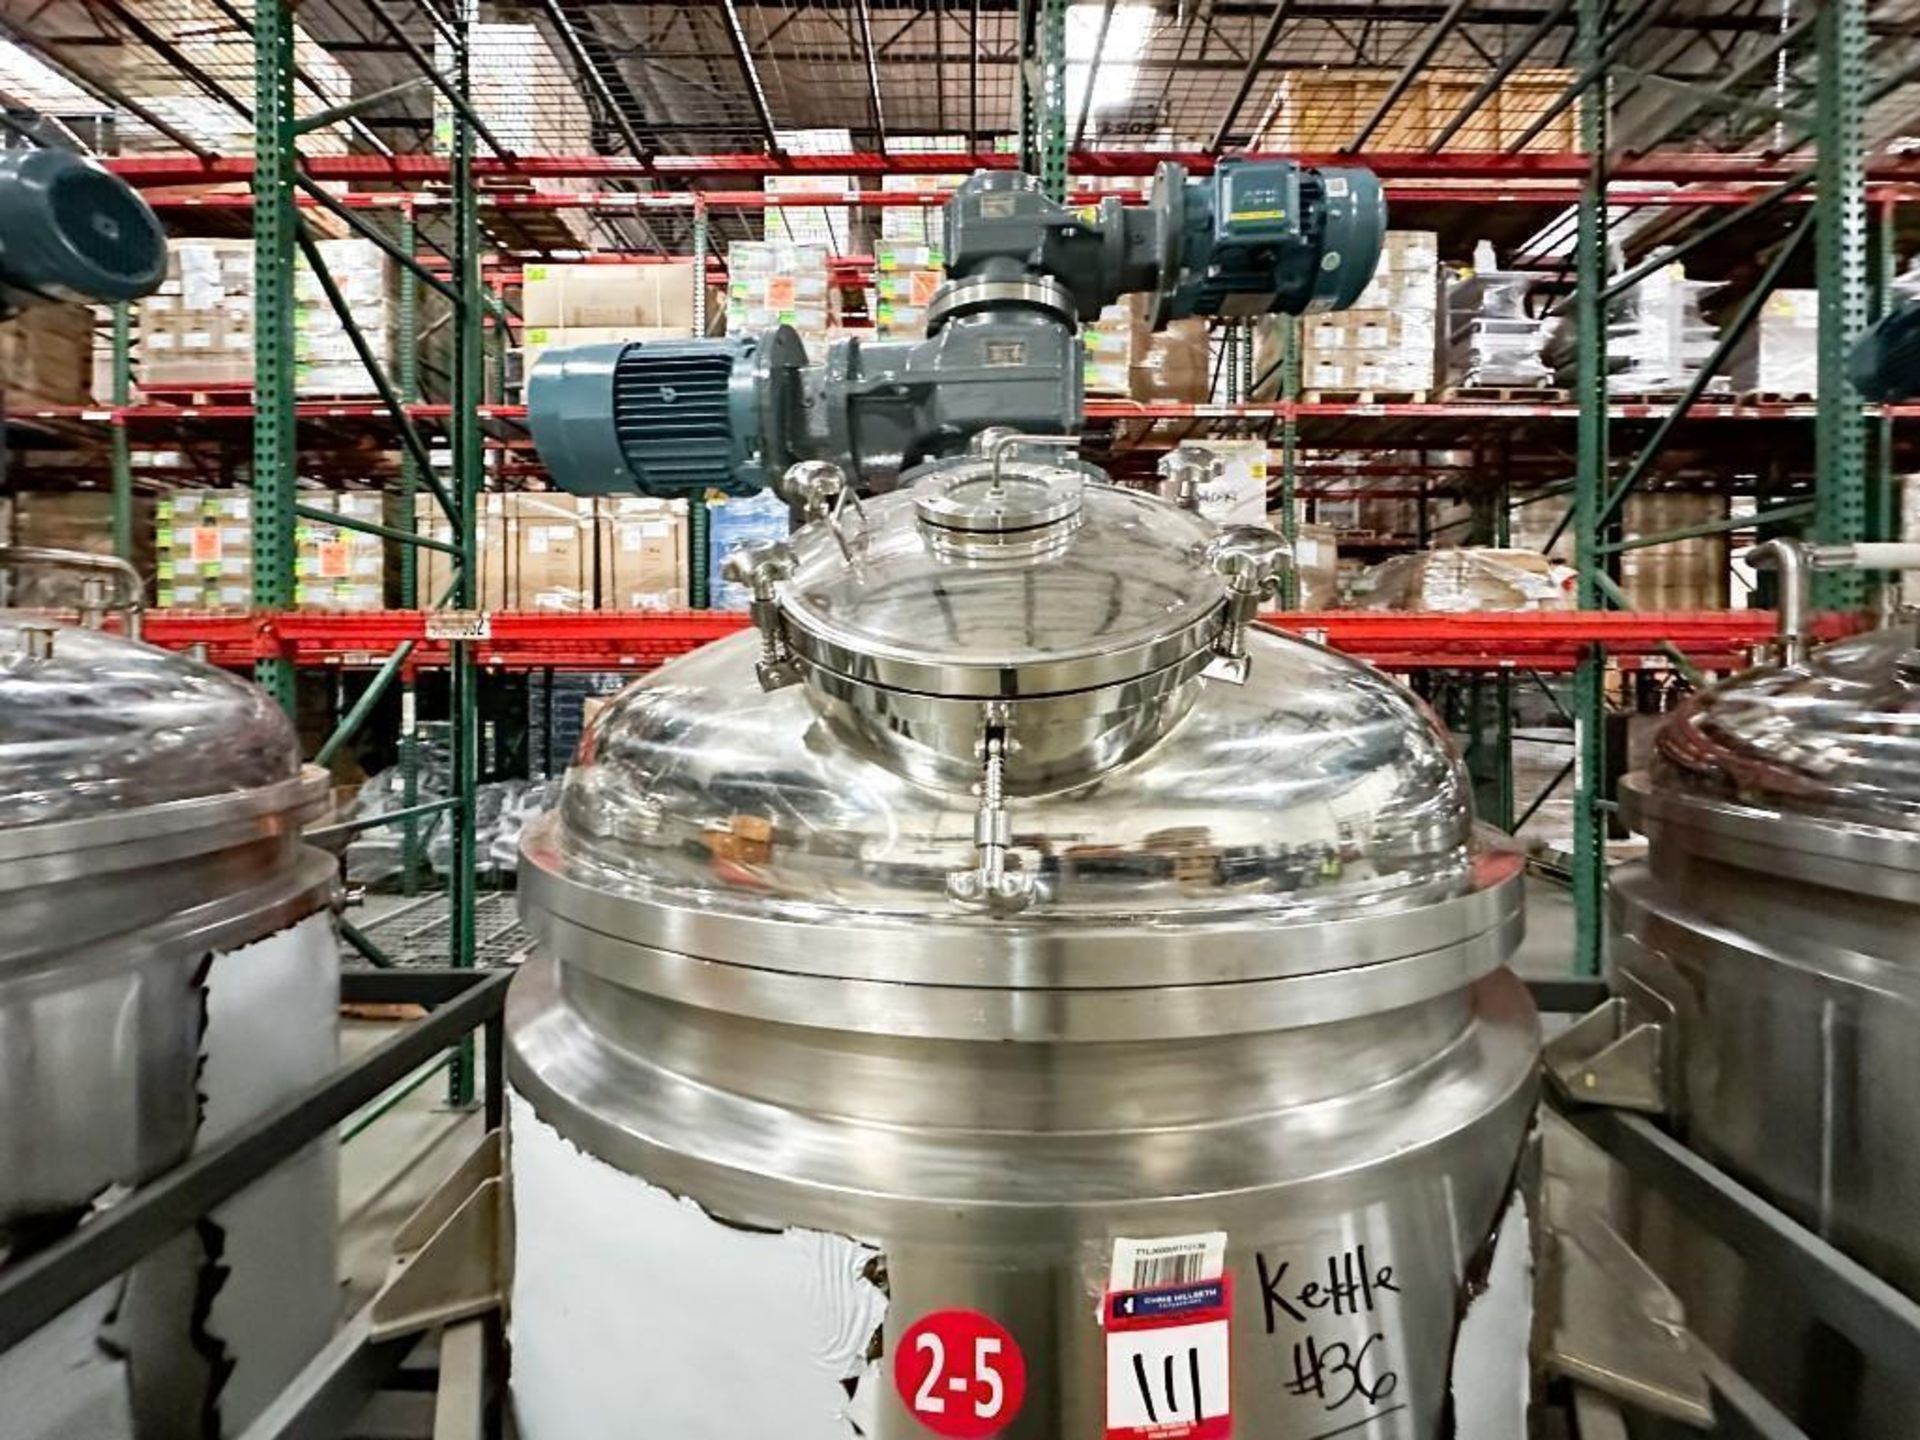 NEW - 1500 Liter, SS, Fully Jacketed, Vacuum, Dual Motion Mixing Kettle - Image 5 of 15